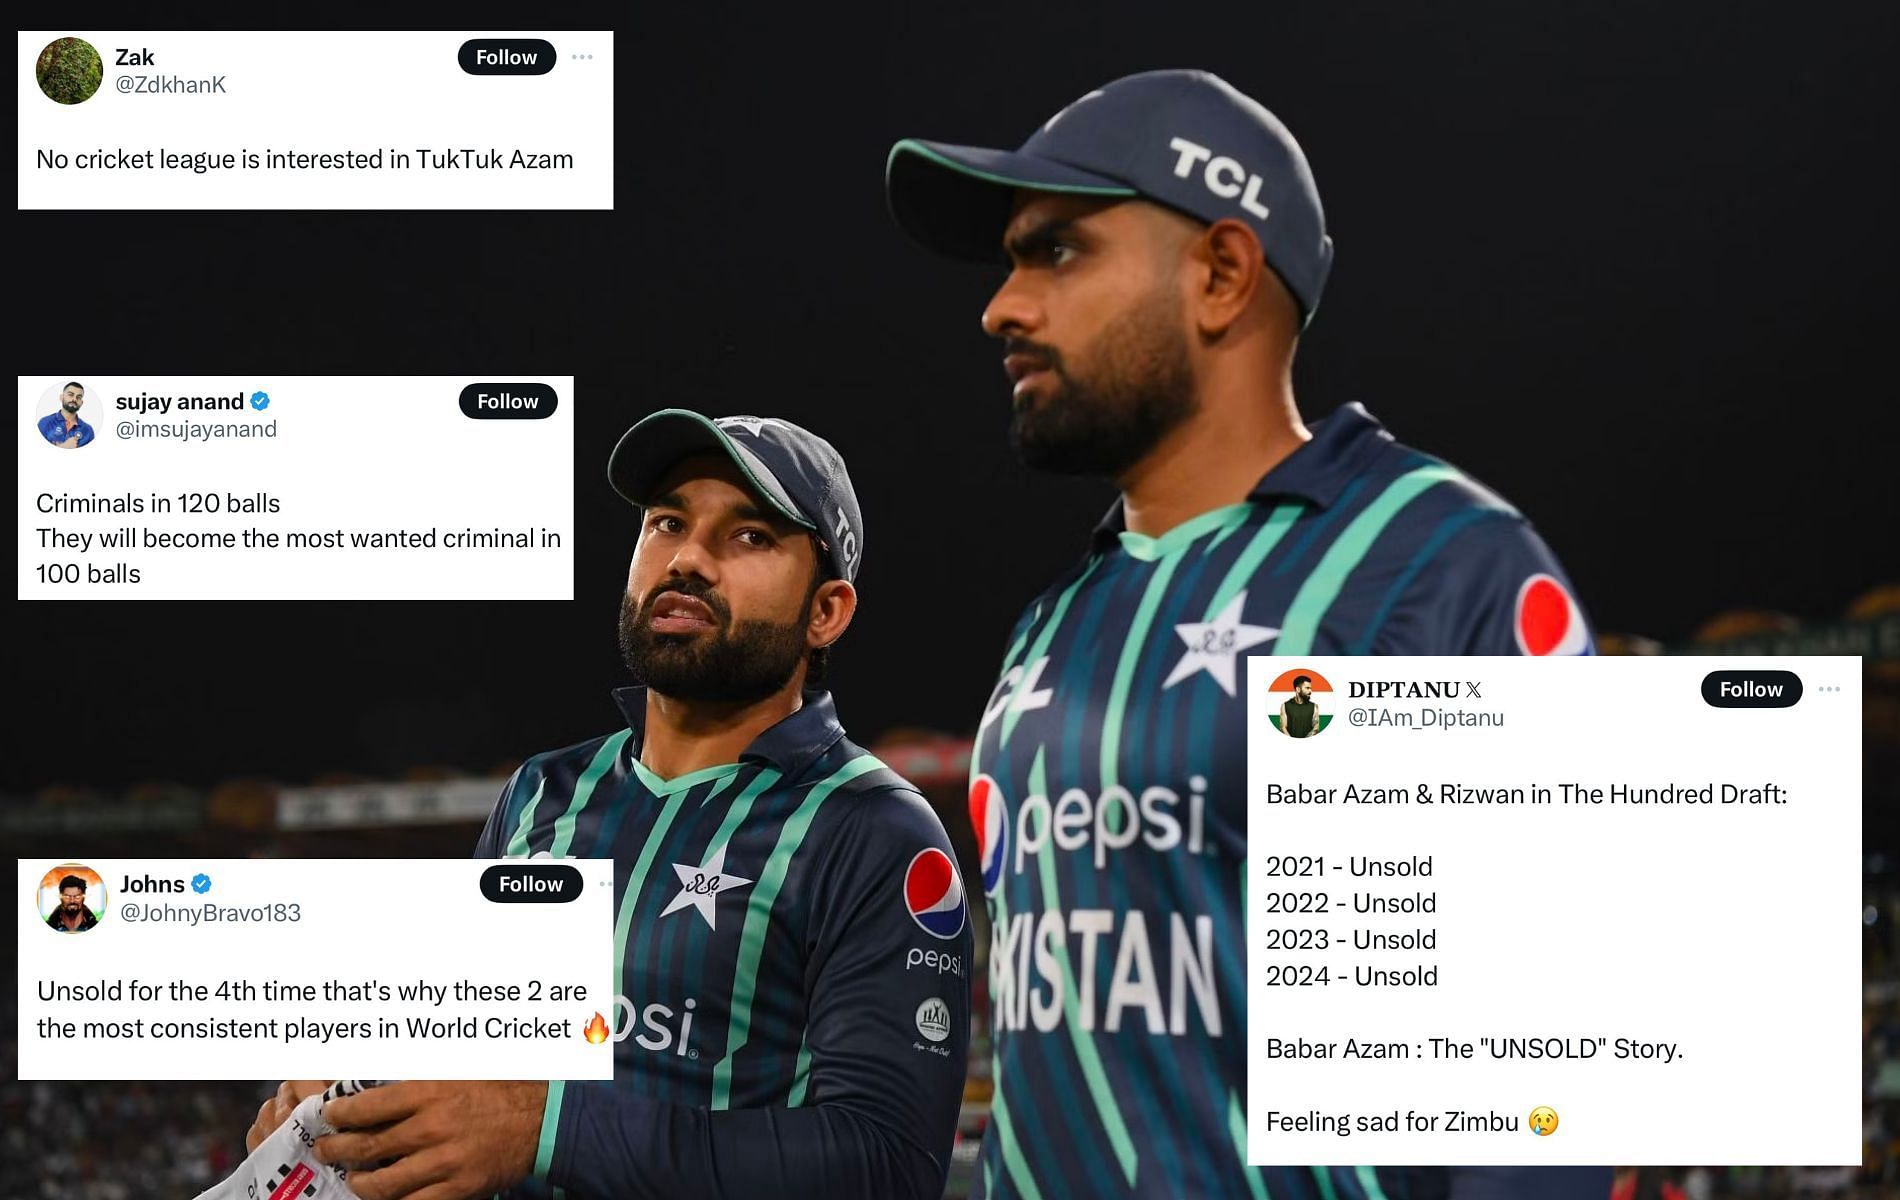 Babar Azam and Mohammad Rizwan went unsold for the fourth time in The Hundred Draft.